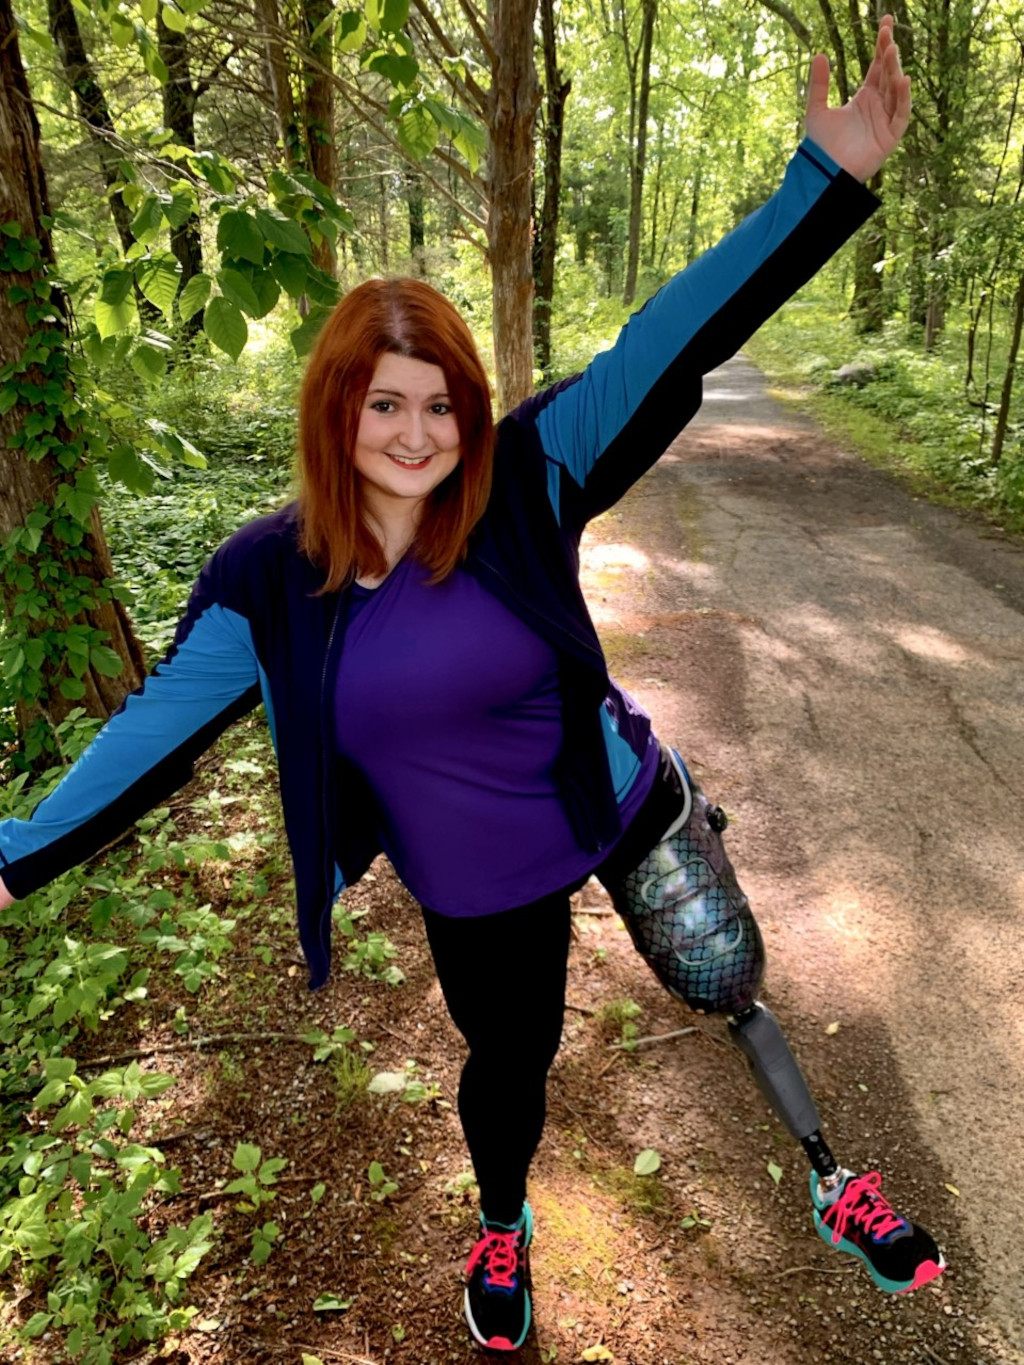 Amputated woman standing in the forest on one leg wearing the prosthetic foot Xtend Foot